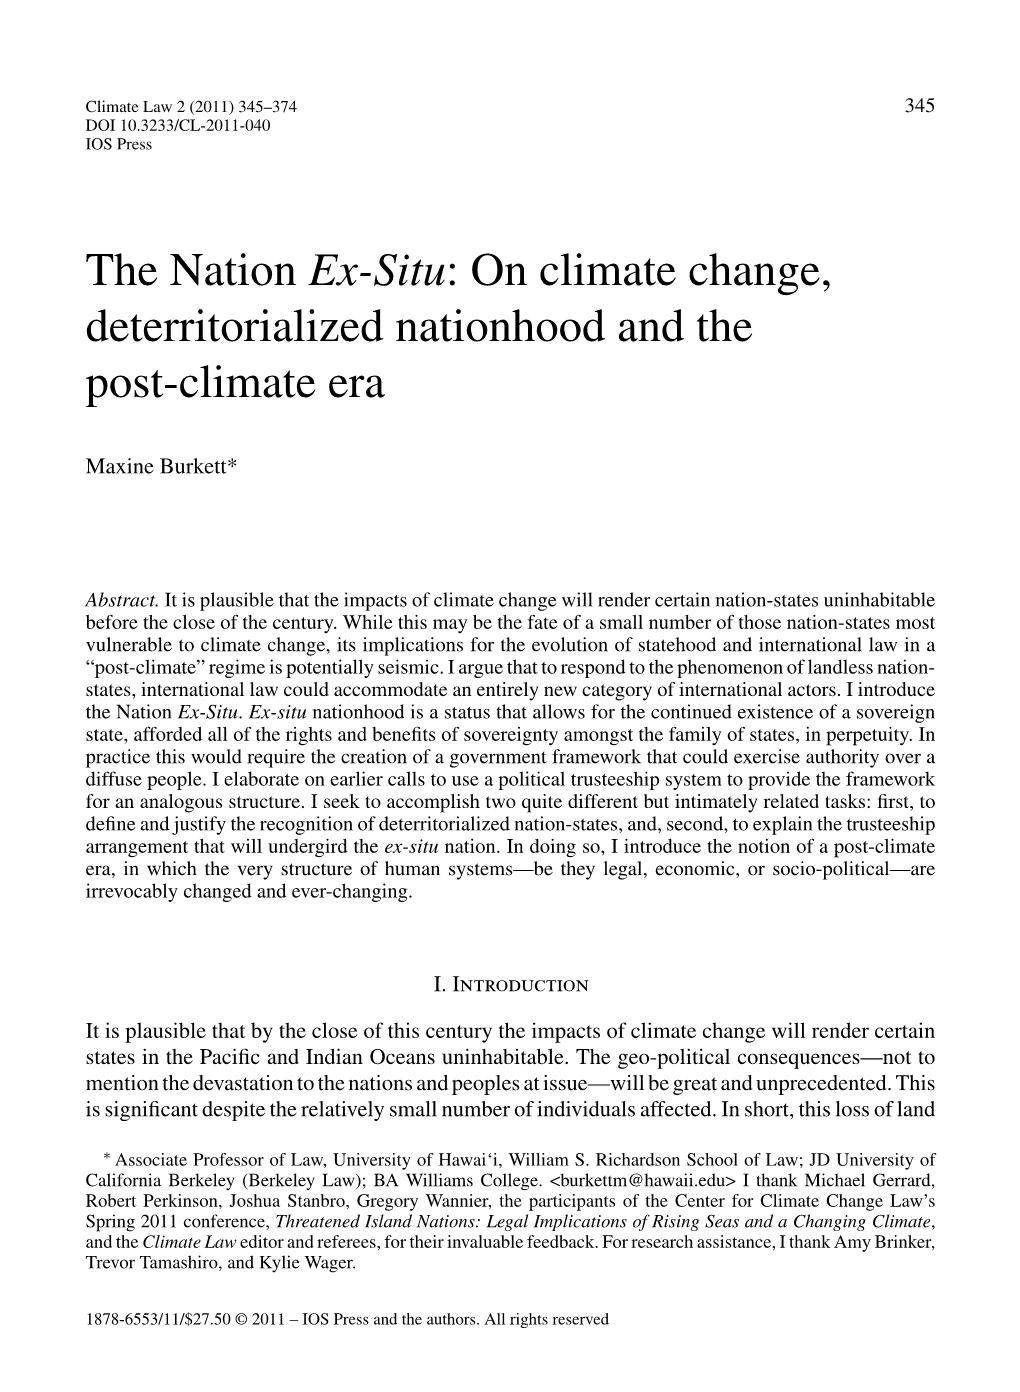 The Nation Ex-Situ: on Climate Change, Deterritorialized Nationhood and the Post-Climate Era